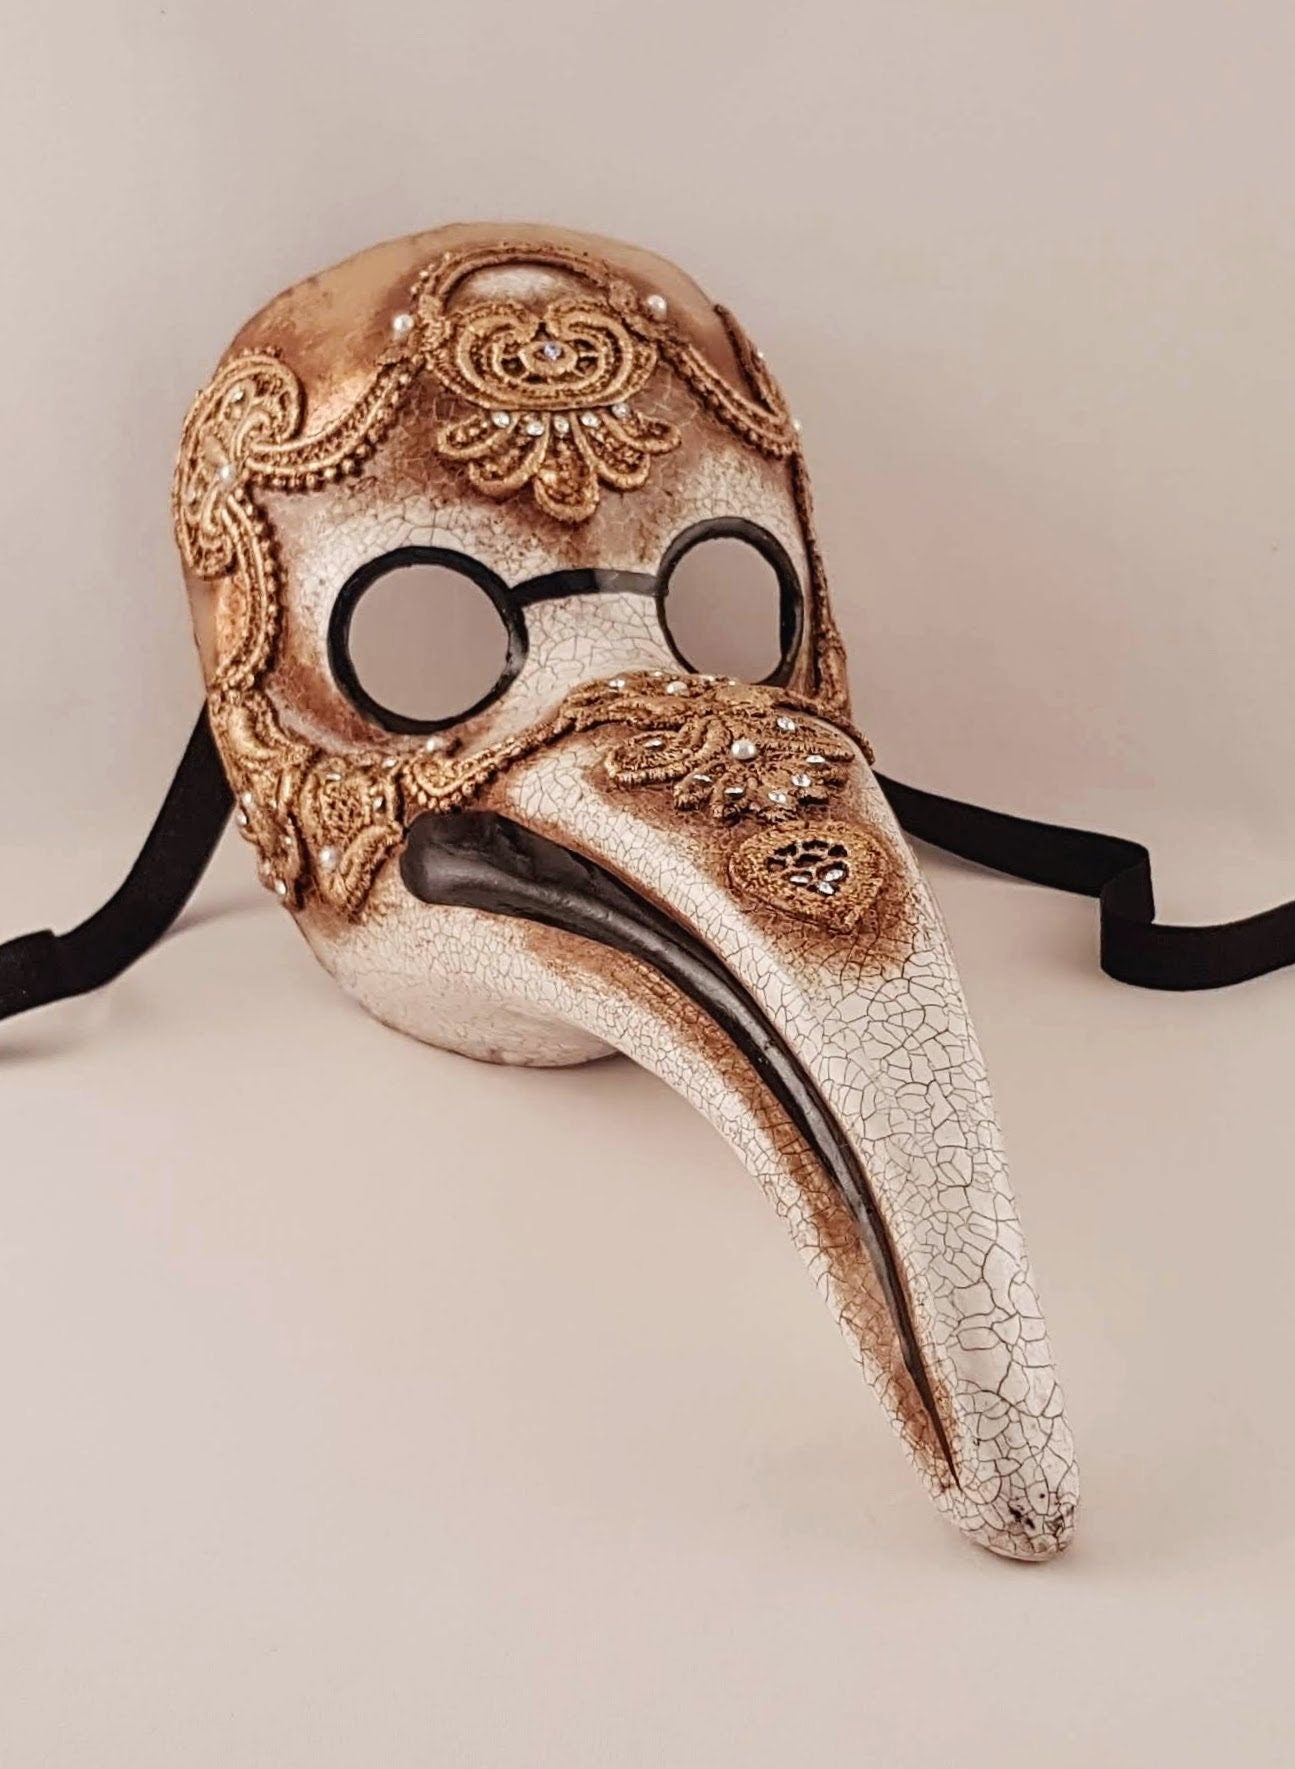 Plague doctor costume mask with macramè gold made by hand in Italy for the Venetian Carnival